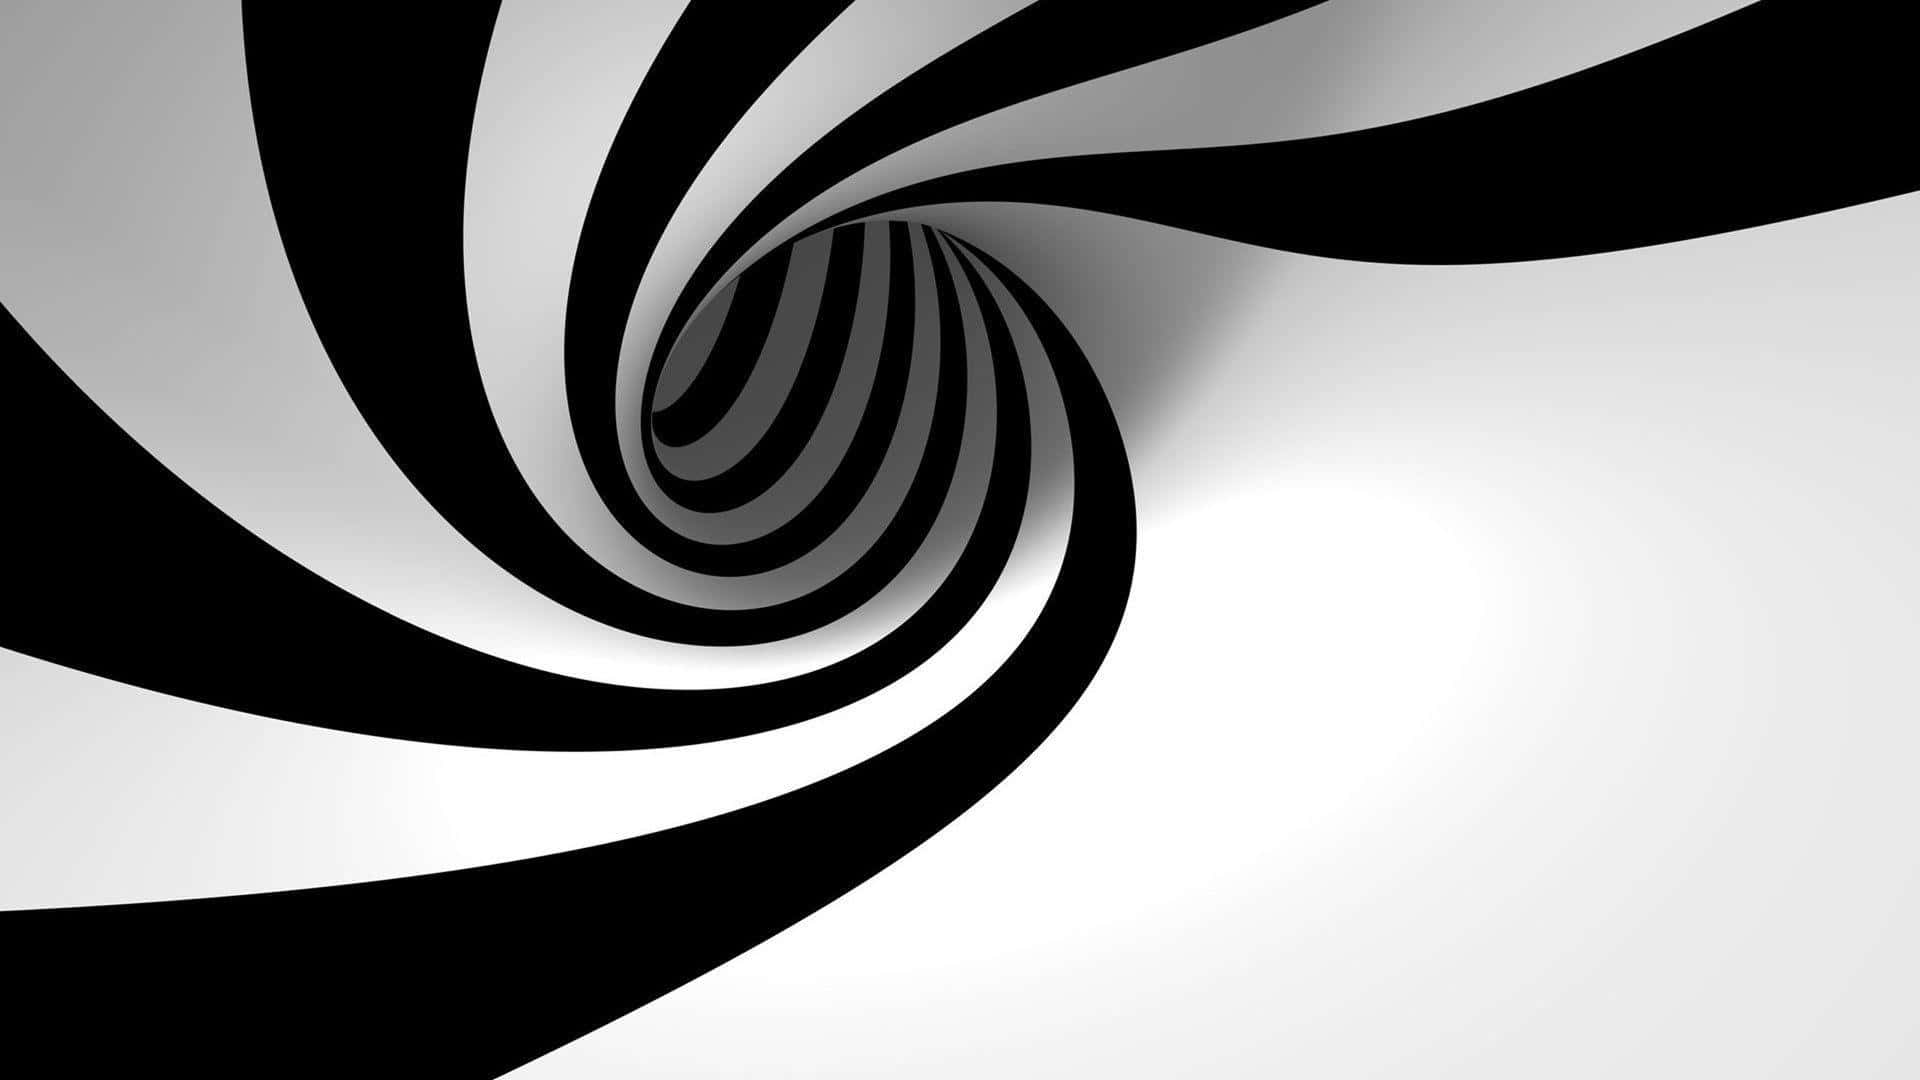 Vortex Black And White Abstract Wallpaper